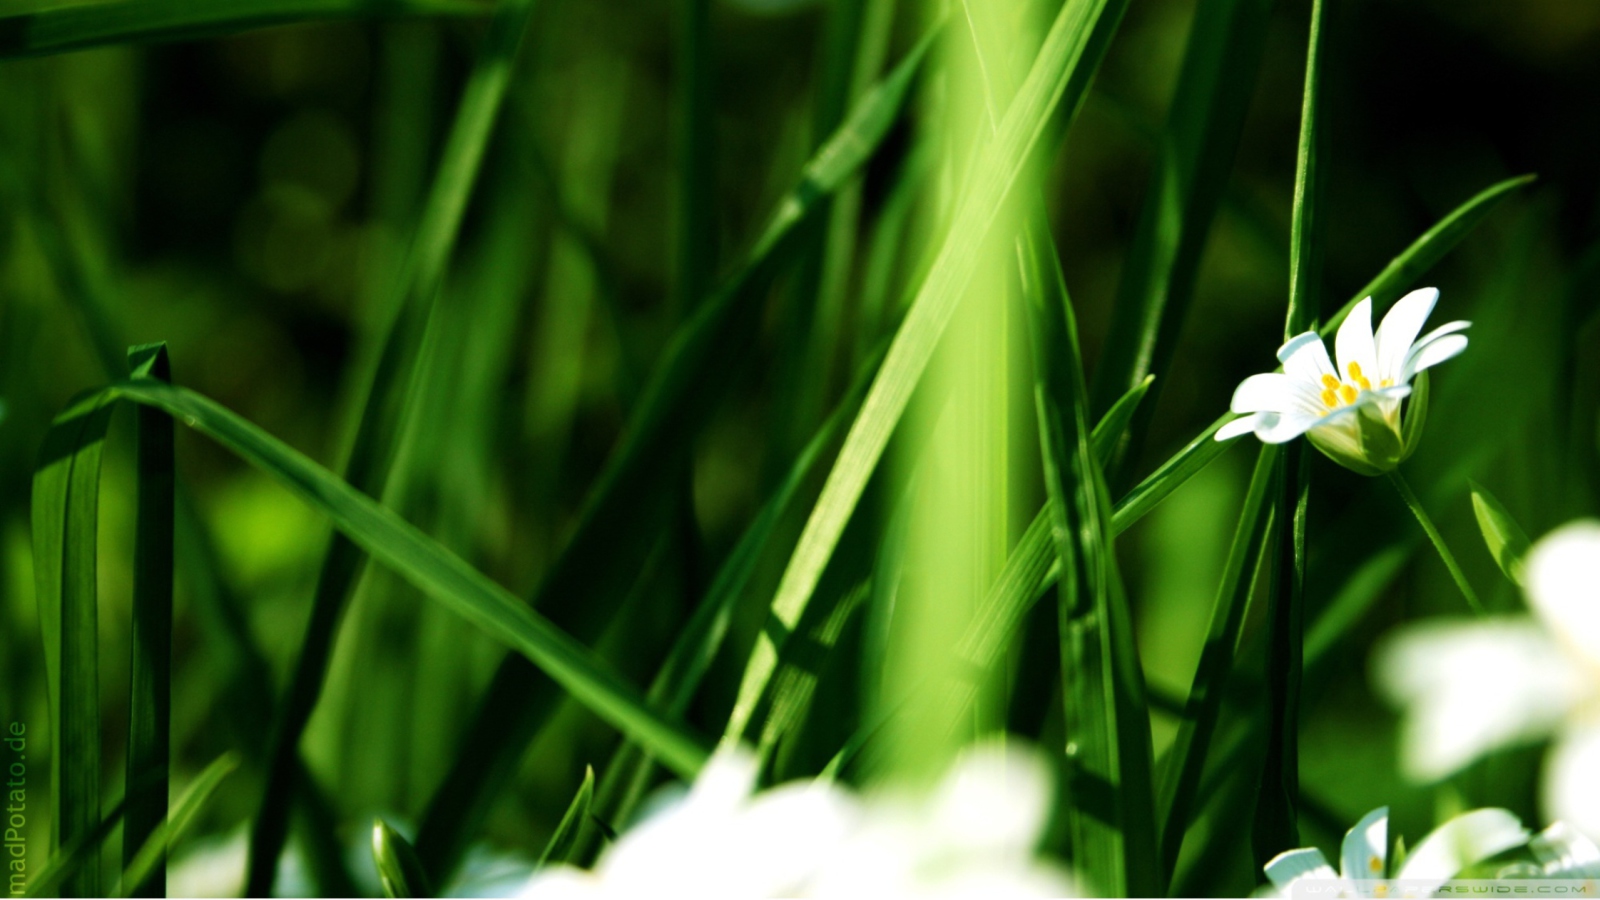 Grass And White Flowers wallpaper 1600x900